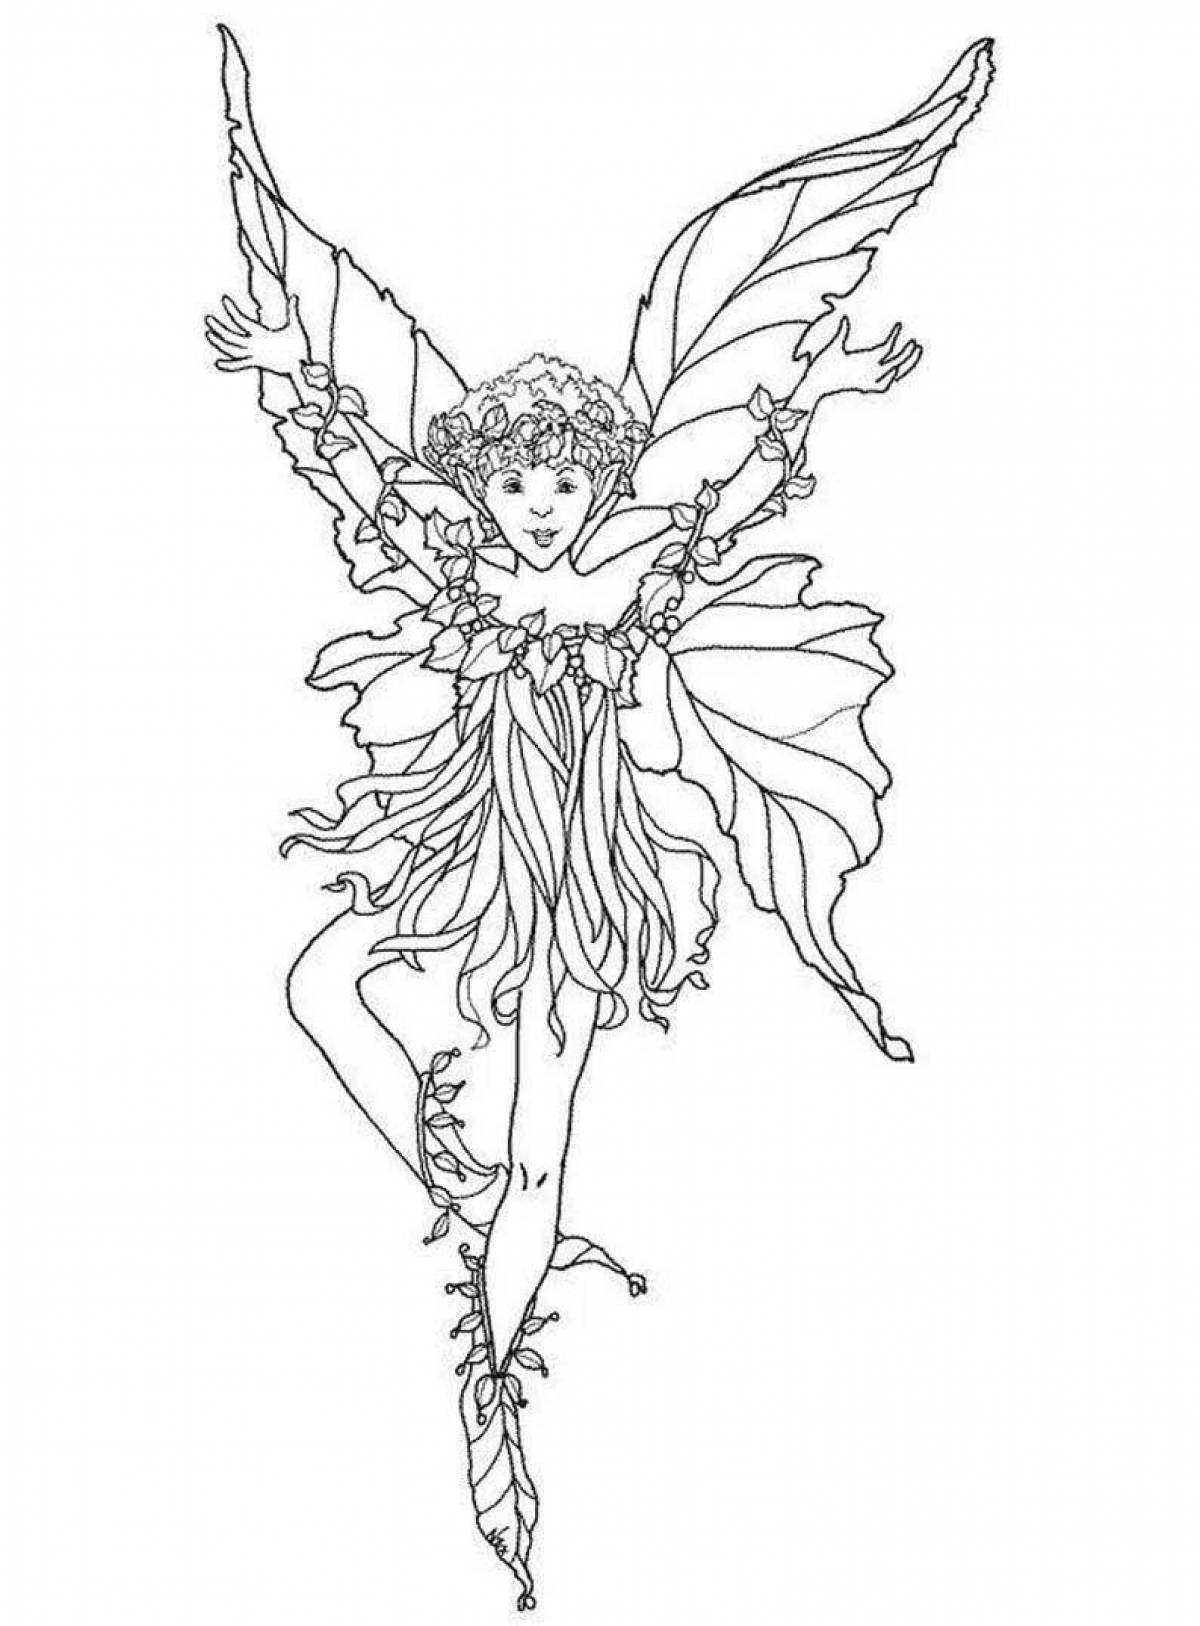 Coloring book shiny forest fairy